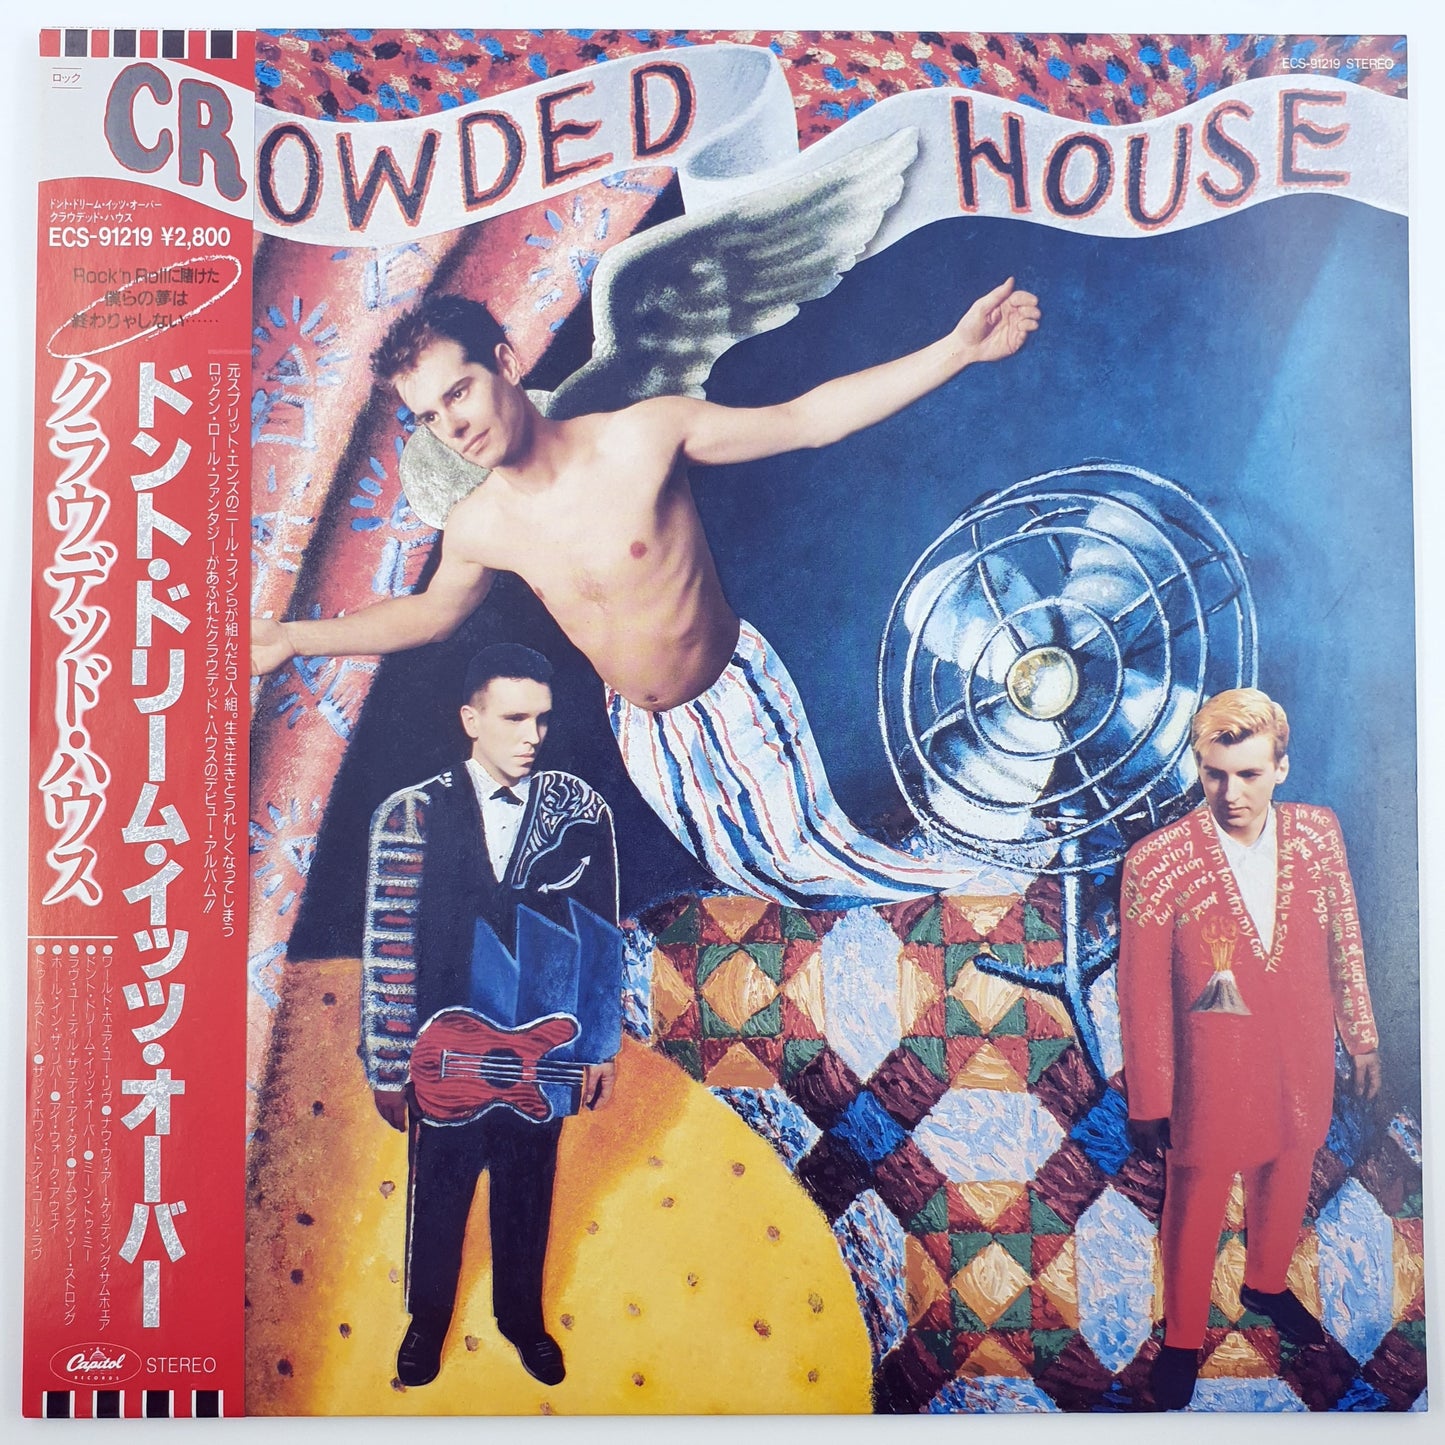 Crowded House - Crowded House